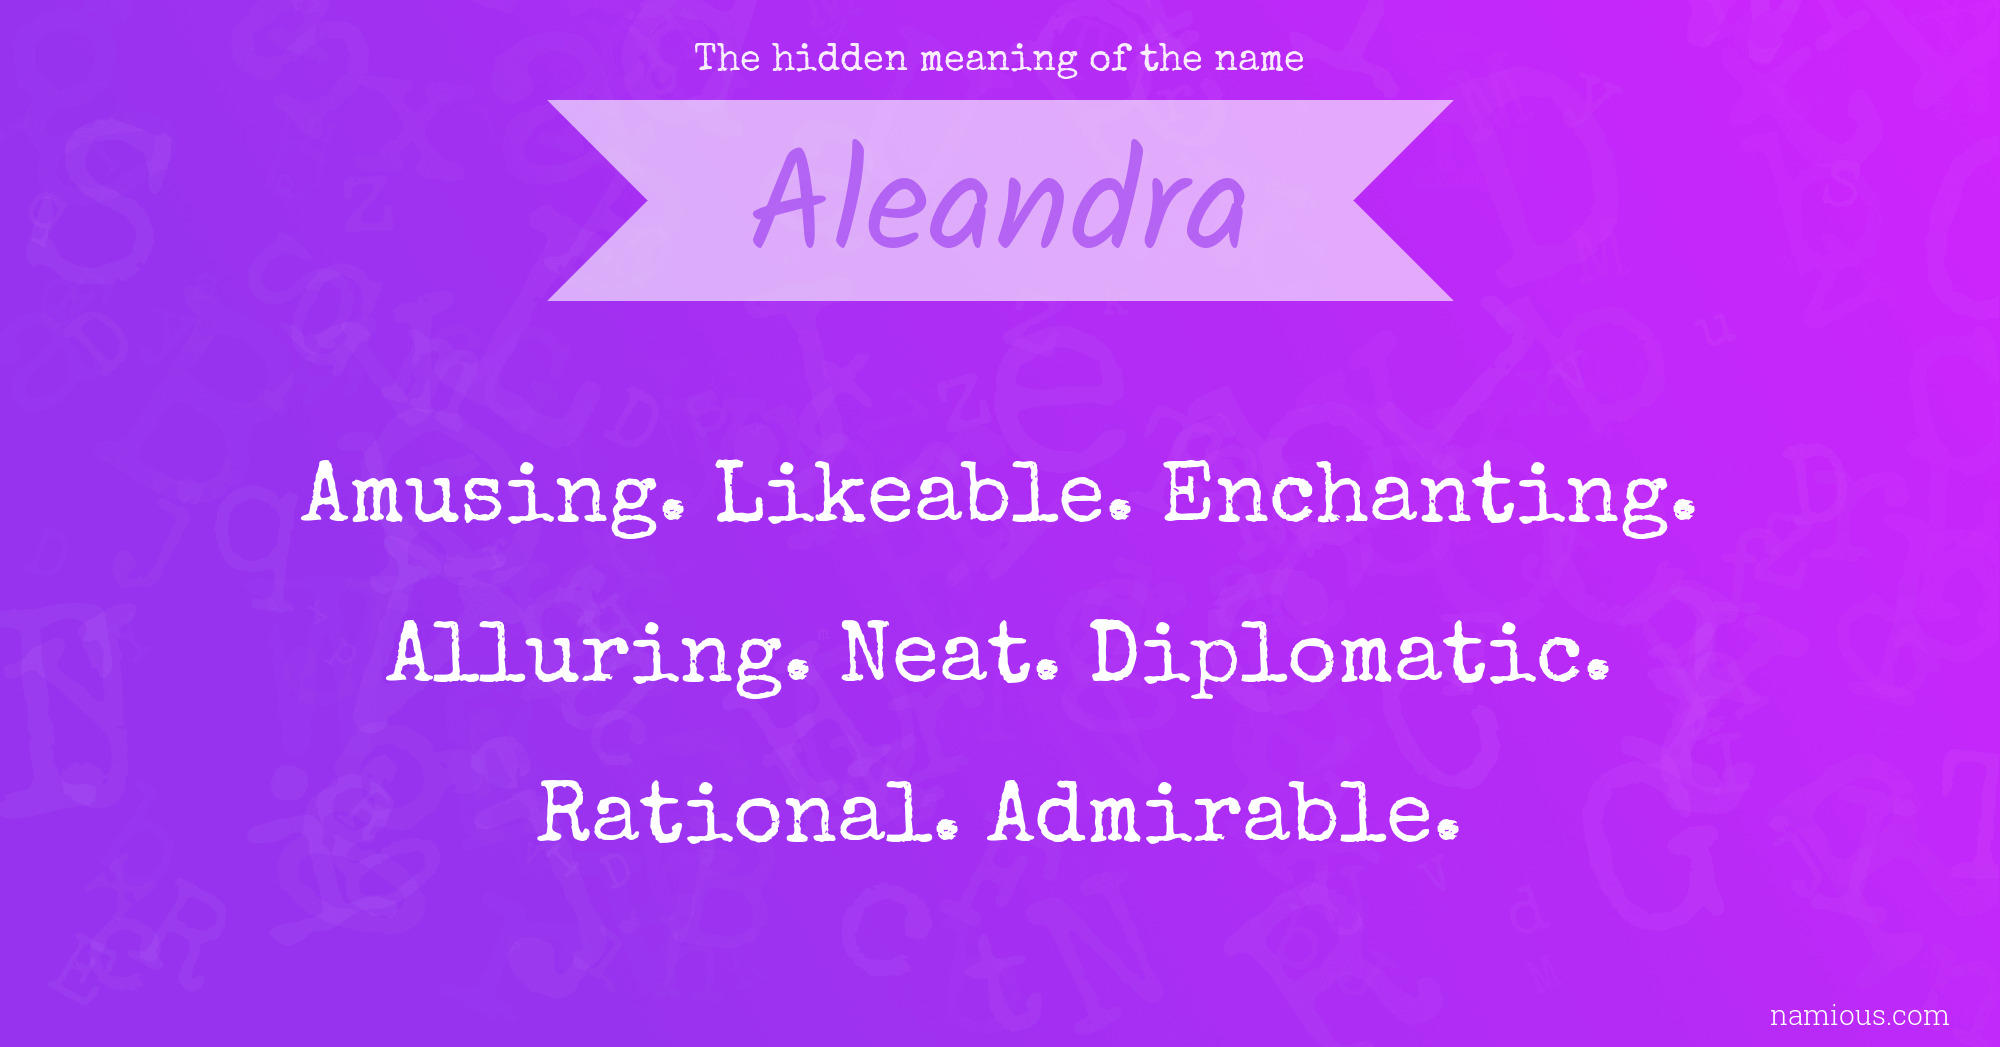 The hidden meaning of the name Aleandra